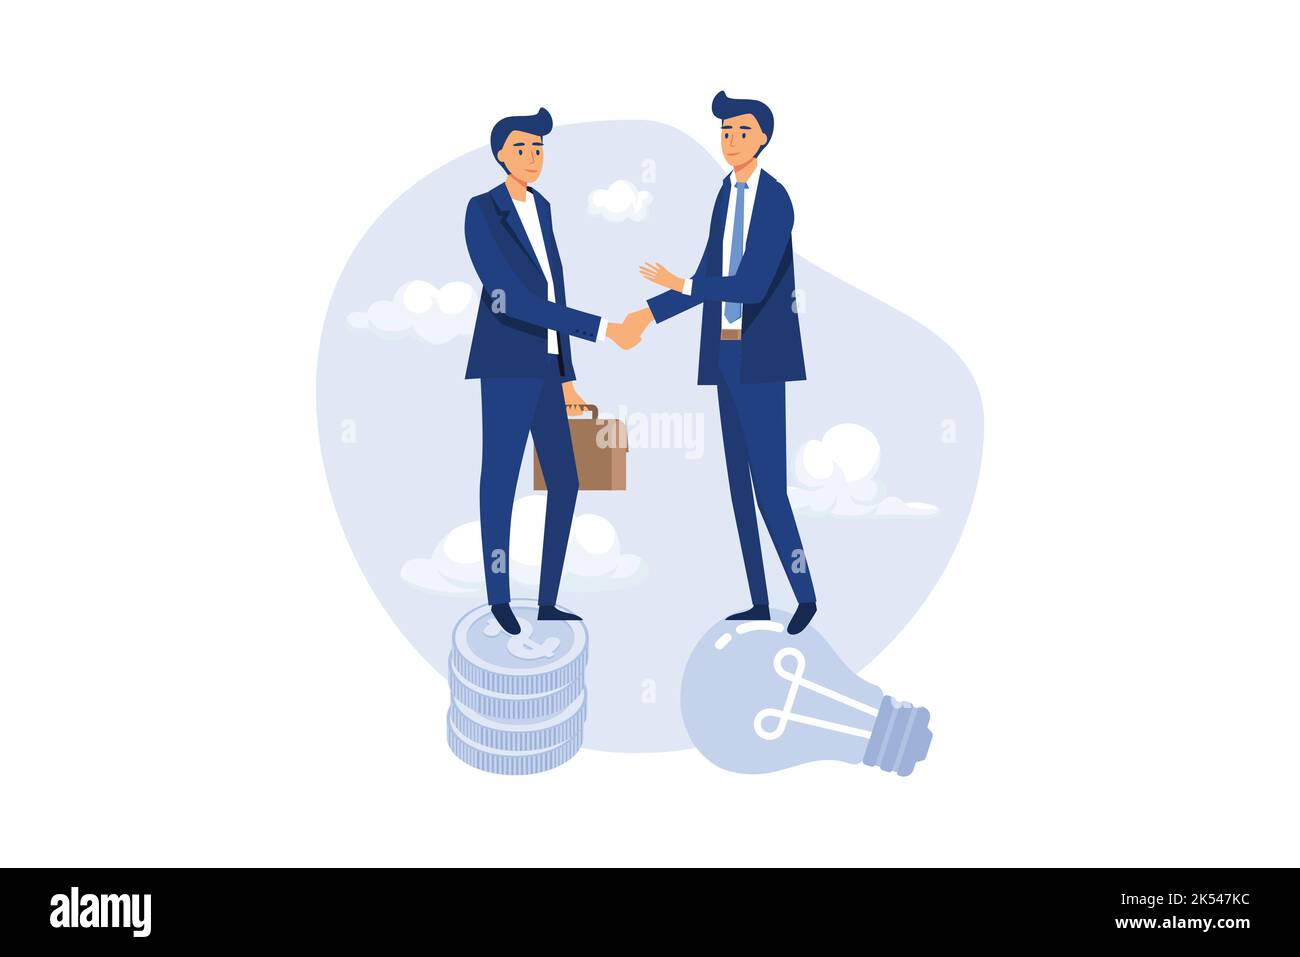 Idea pitching, fund raising and venture capital, selling business or merger agreement concept, entrepreneur businessman standing on lightbulb idea lam Stock Vector